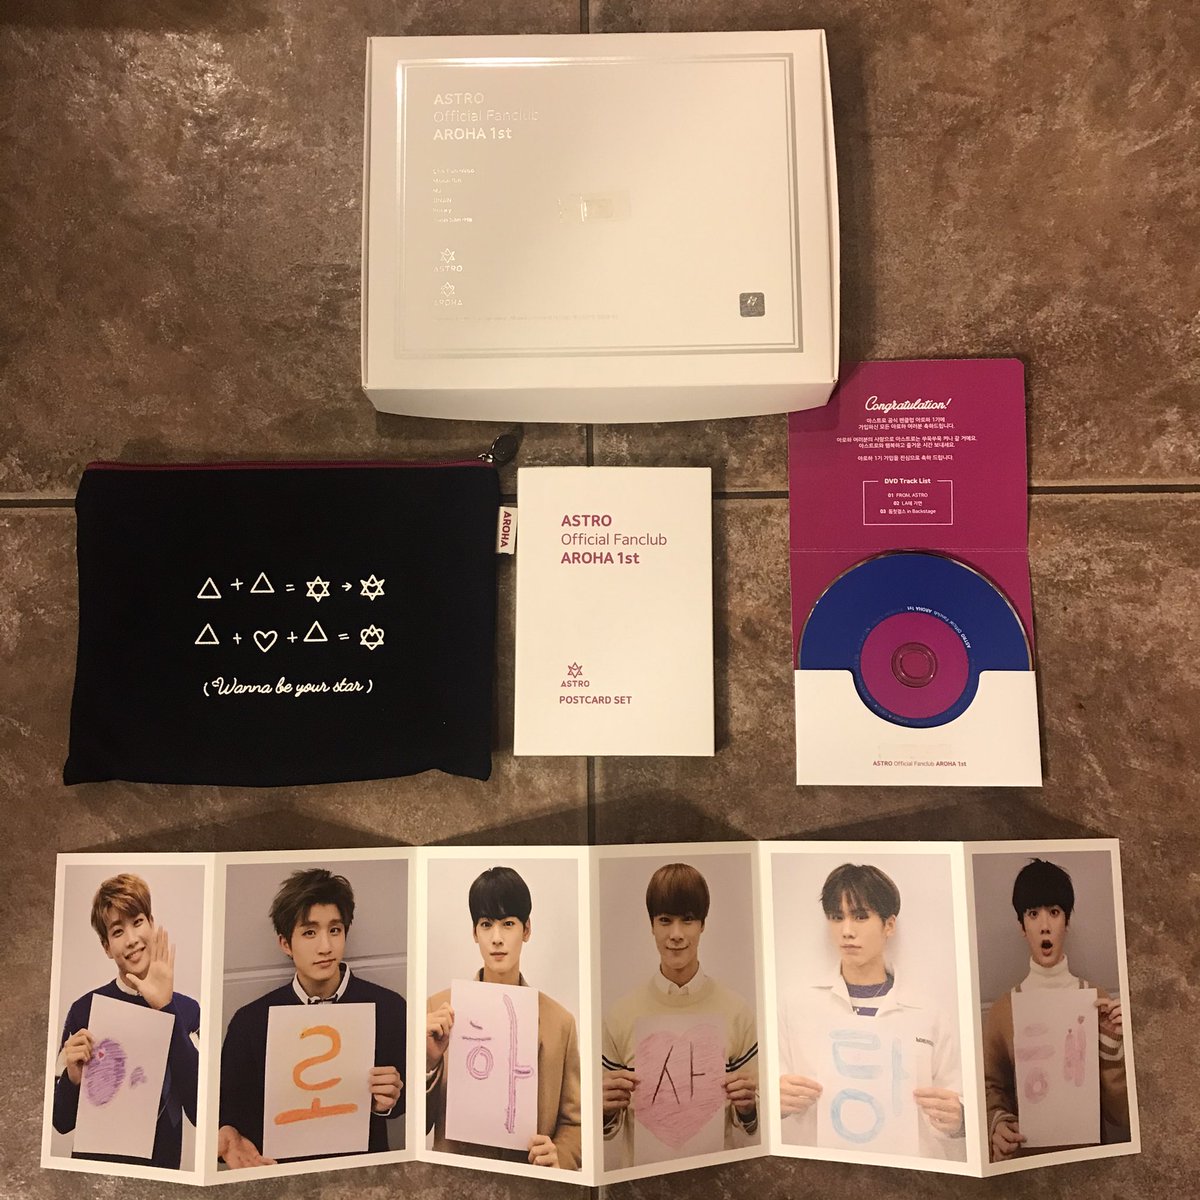 astro↳ 1st gen fanclub kit→ $30→ comes with everything shown